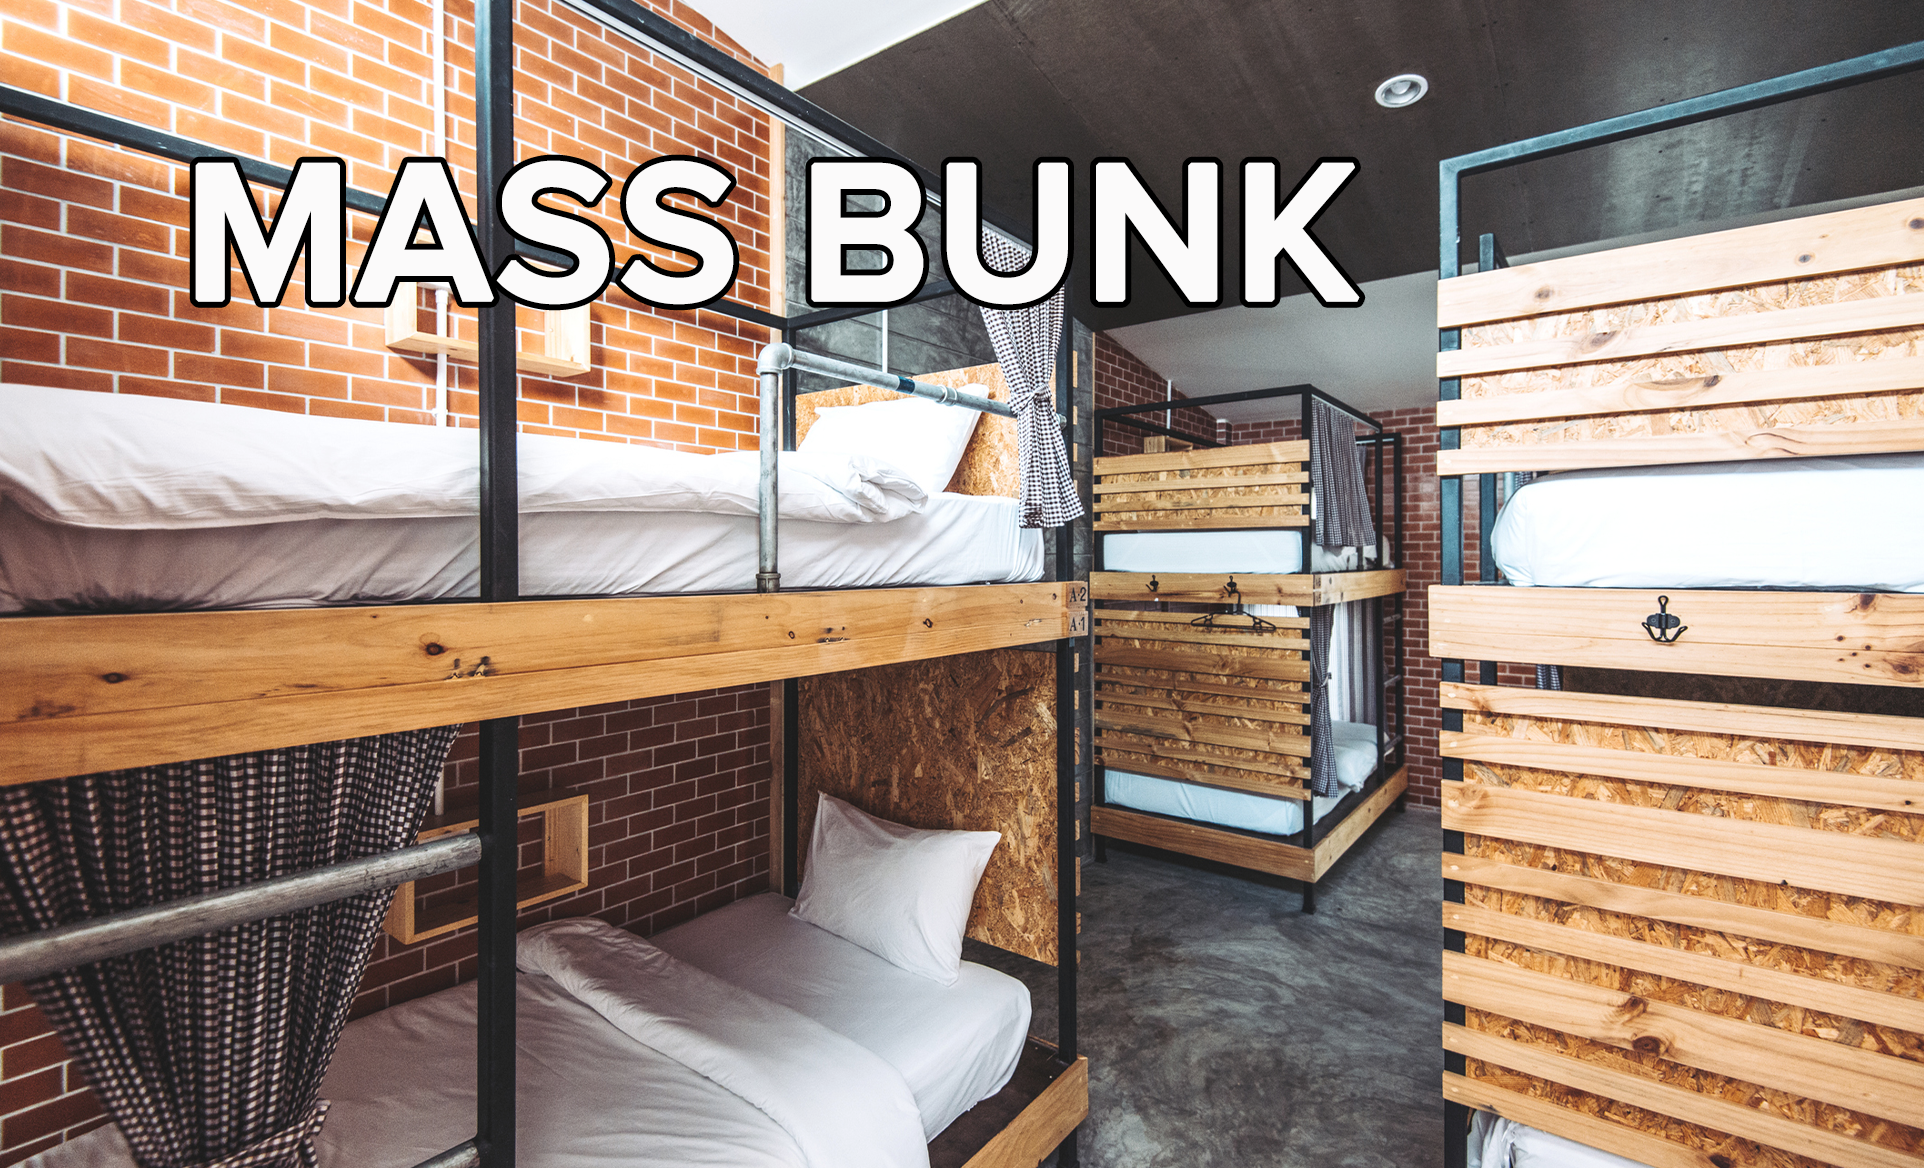 Several wooden bunk beds in a hostel